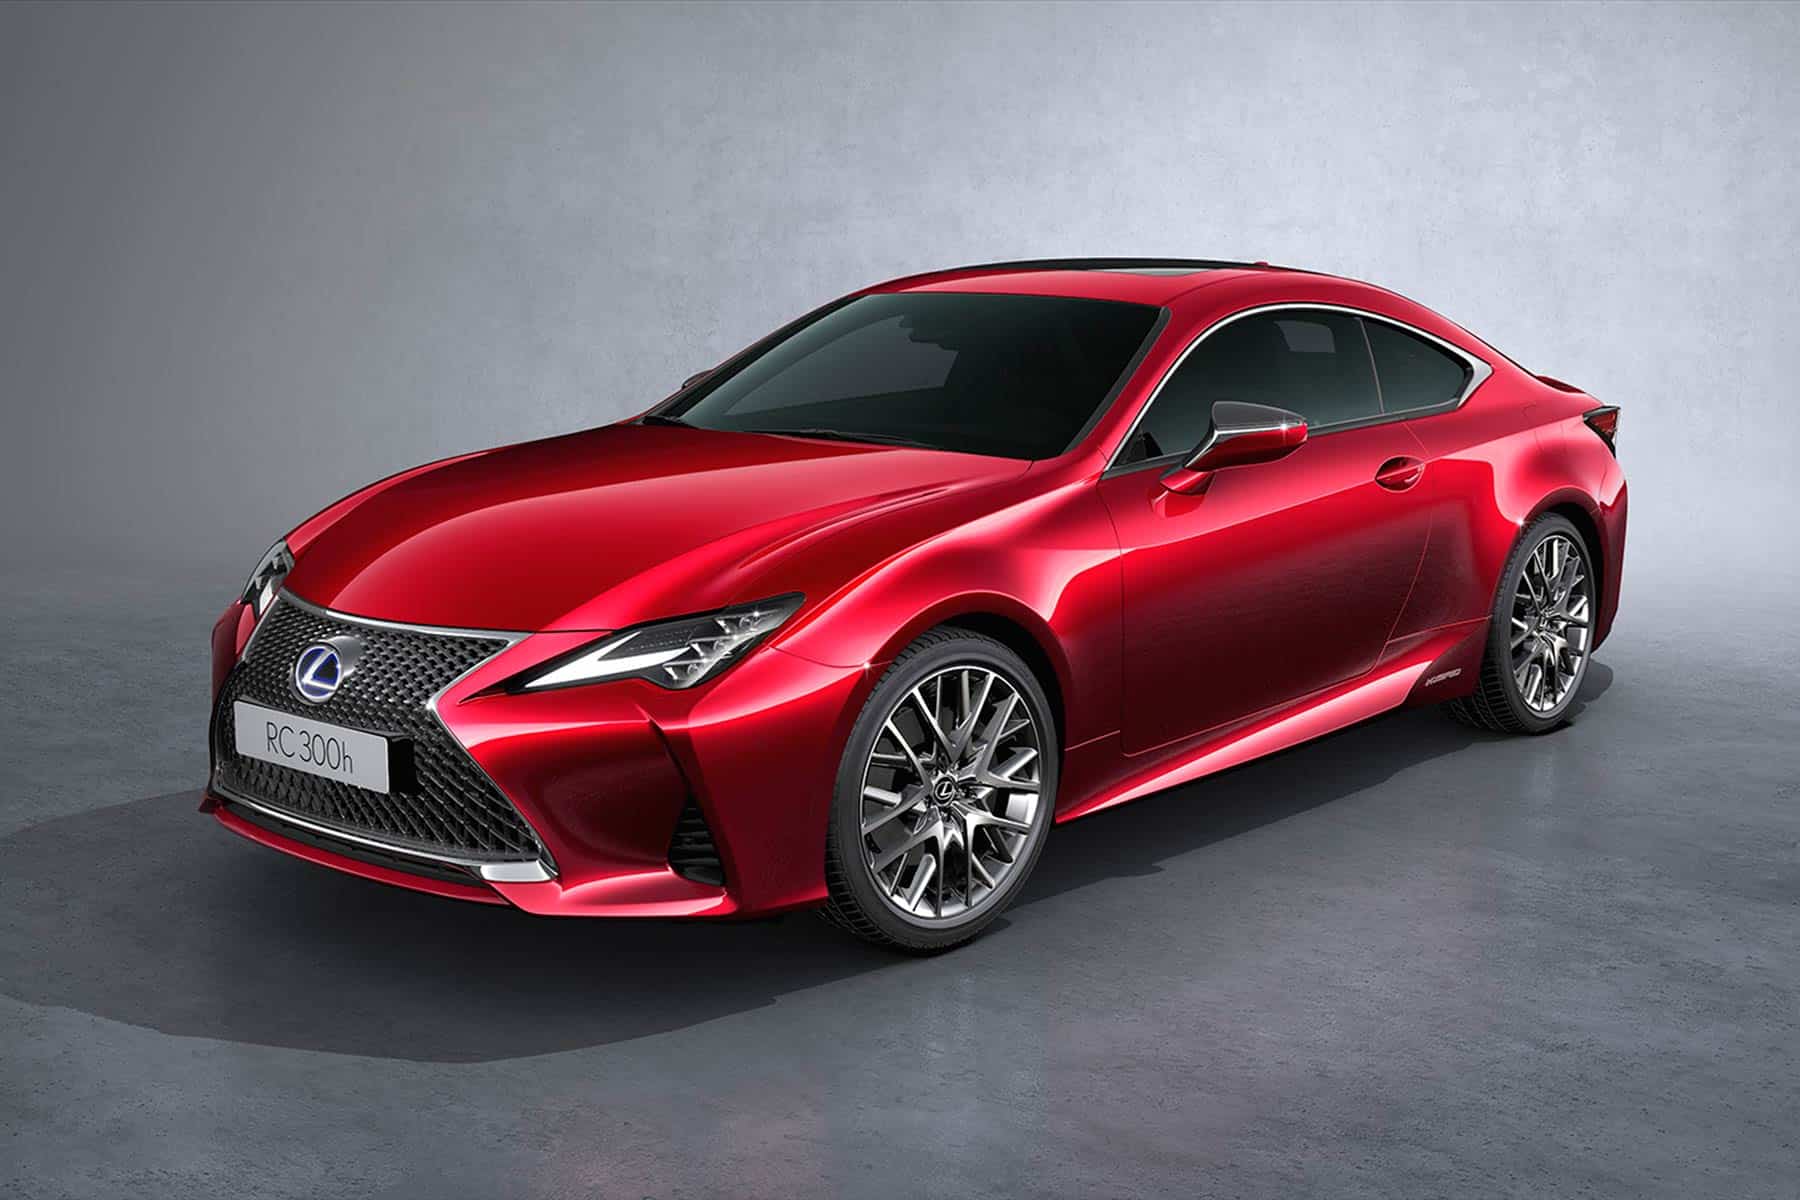 Lexus RC 2019 unveils itself before officially launching